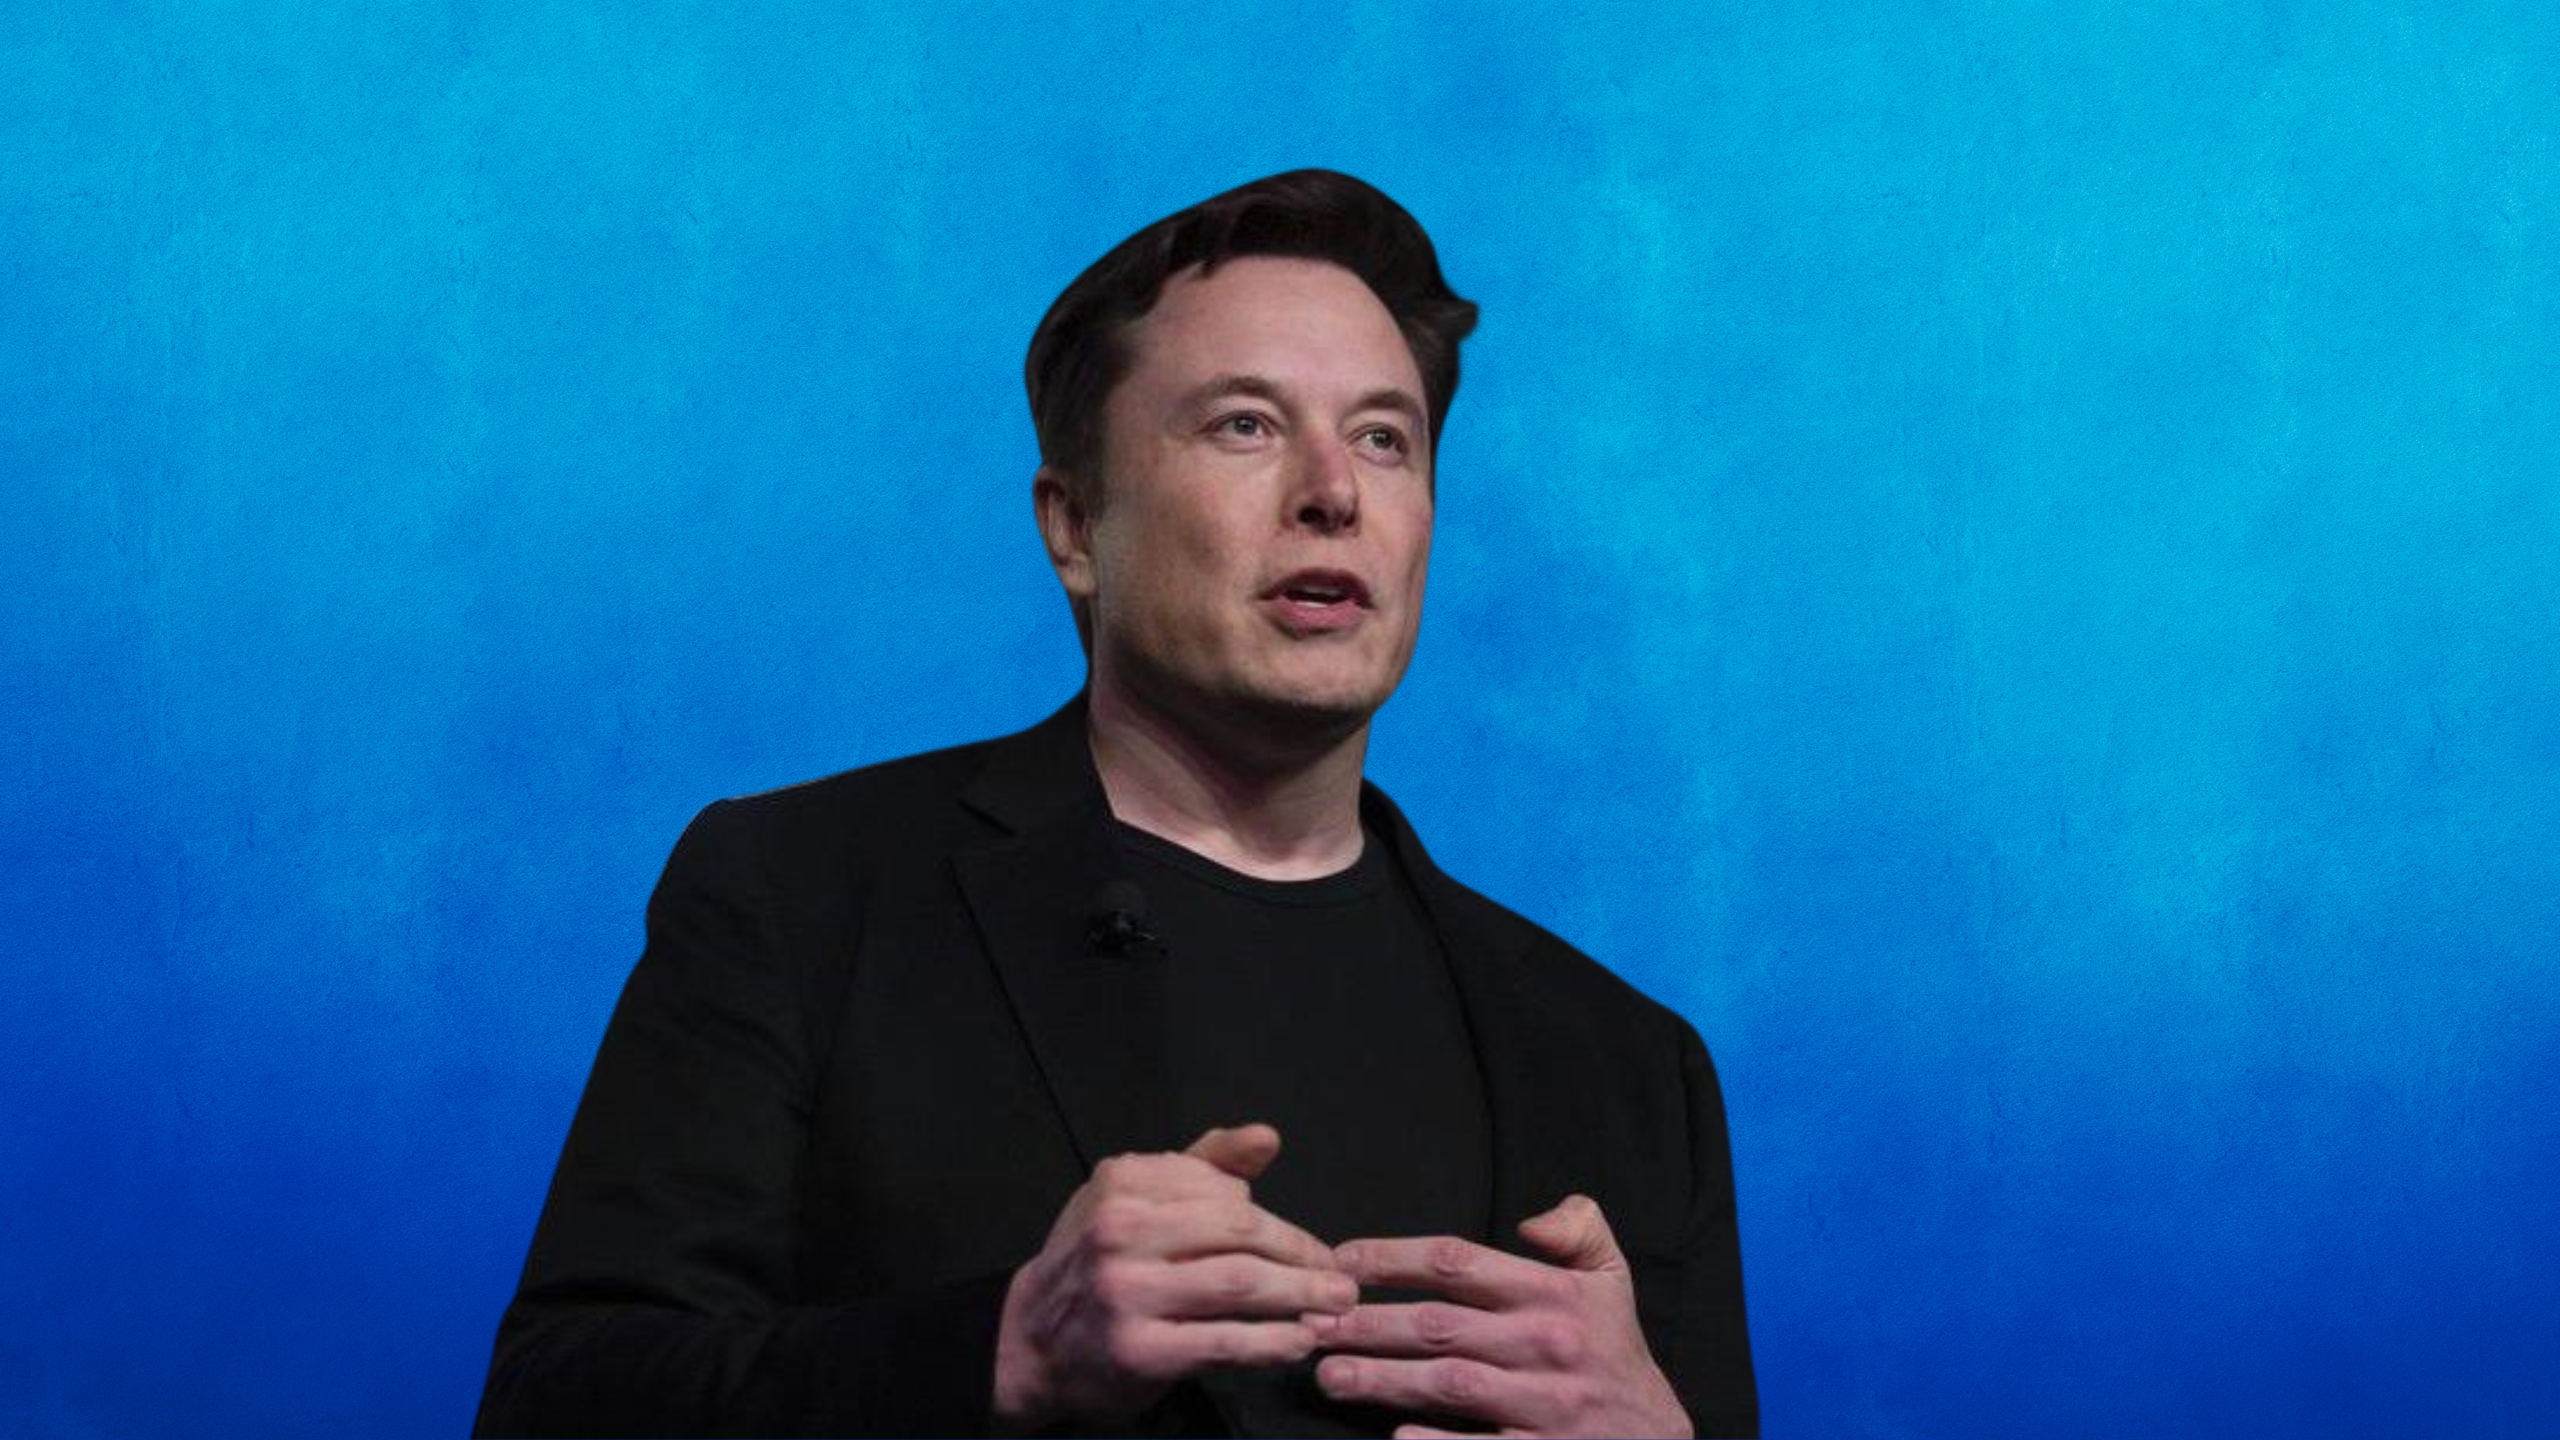 Elon Musk responds to reports of his search for a new Twitter CEO